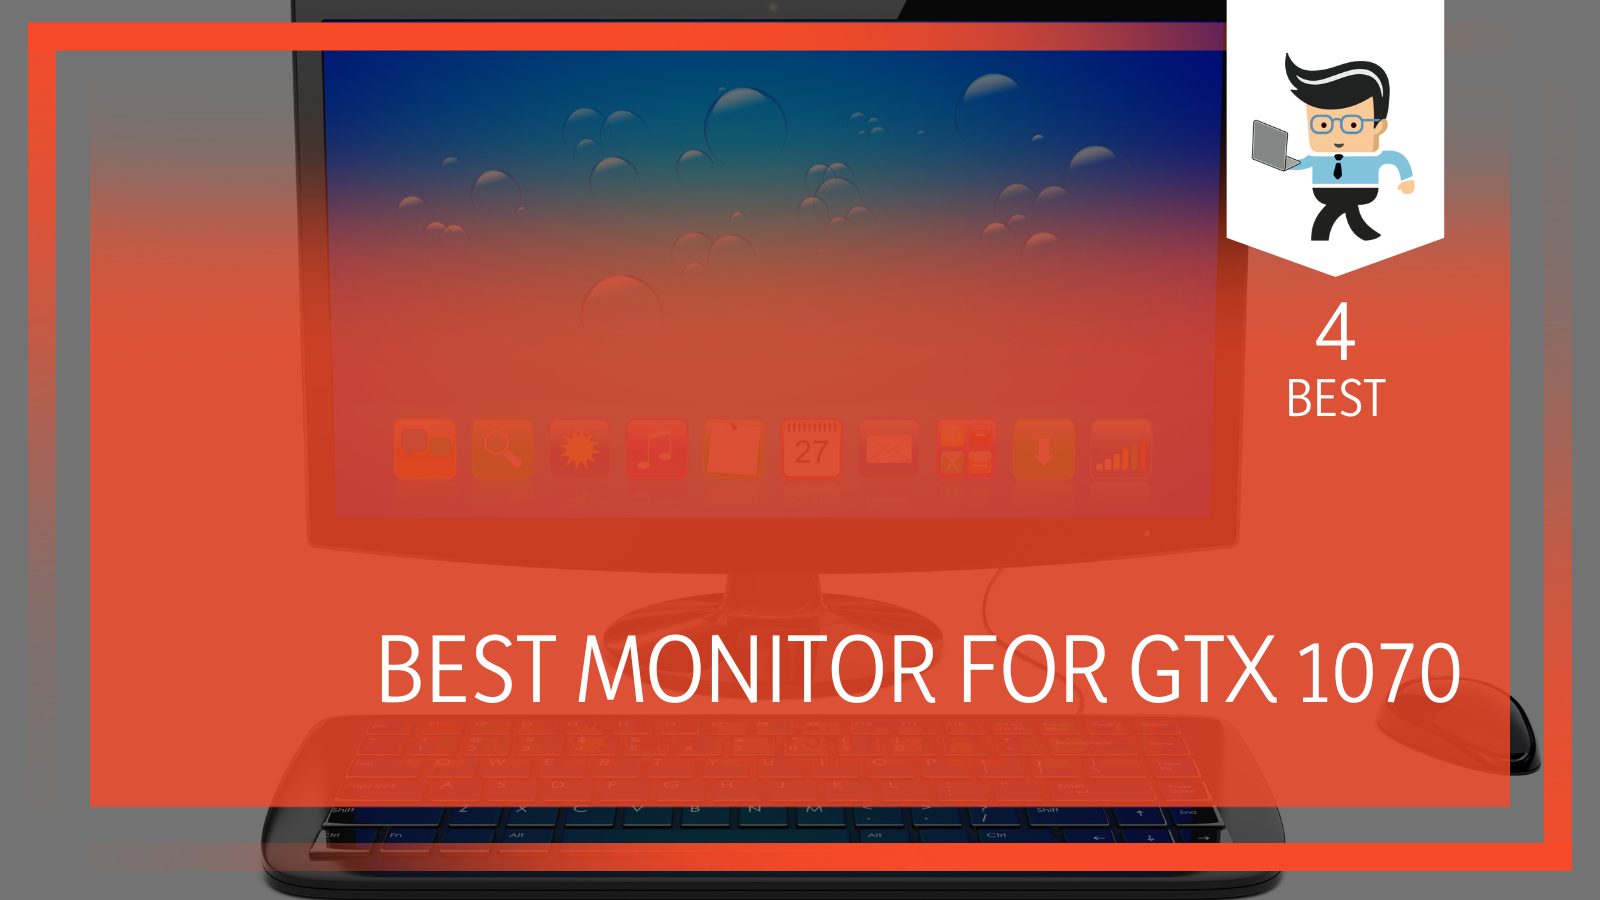 What is the Best Monitor for Gtx